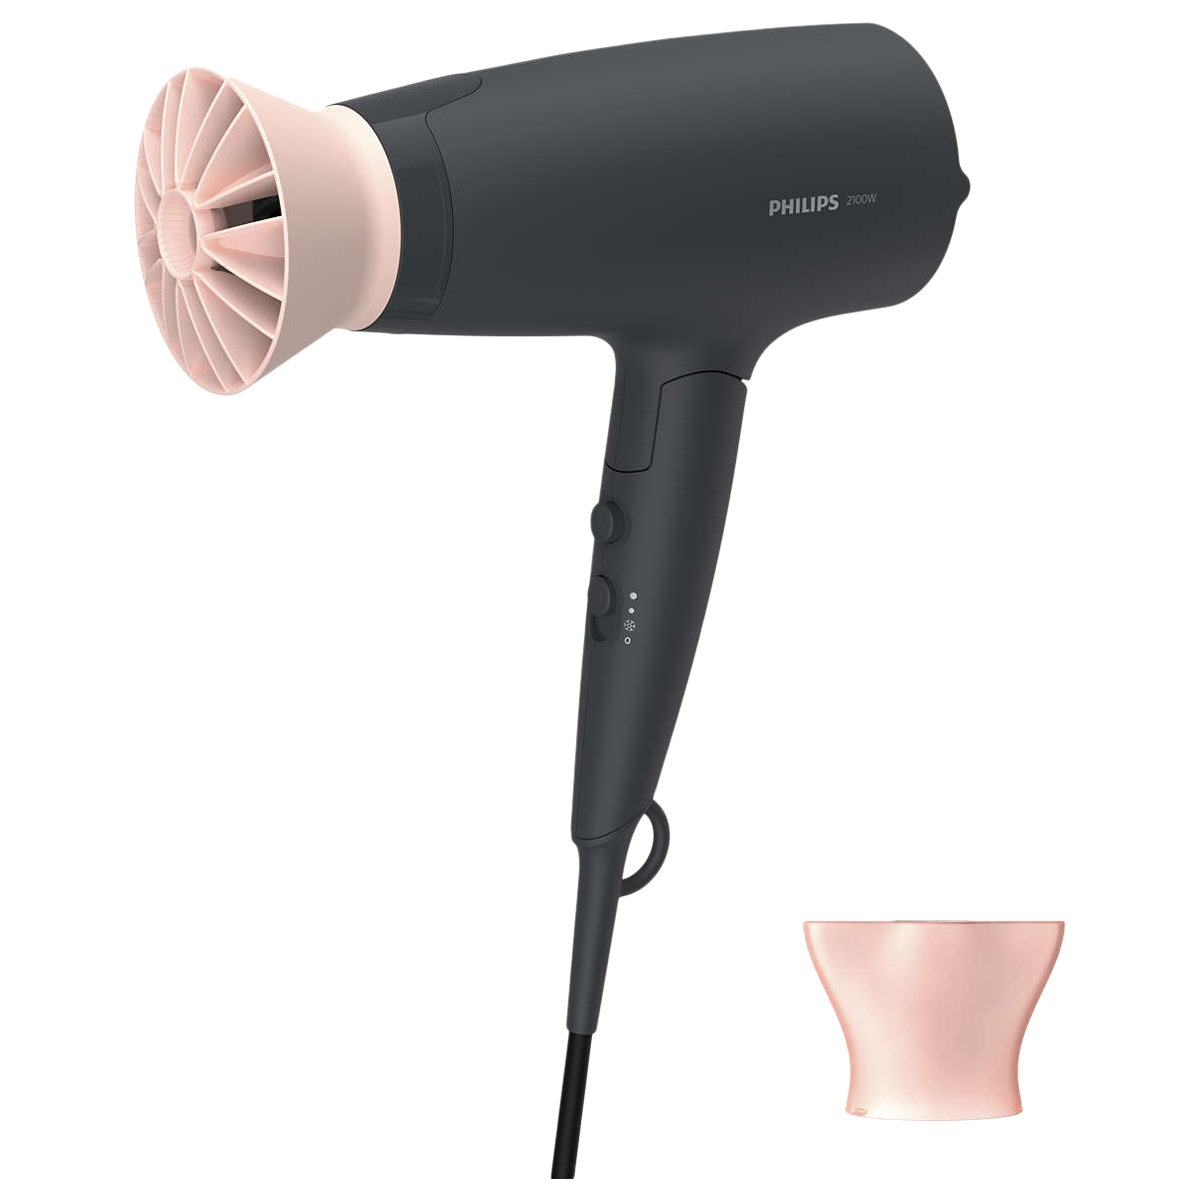 philips - philips 3000 Series 6 Setting Hair Dryer (ThermoProtect Technology, BHD356/10, Pink/Black)